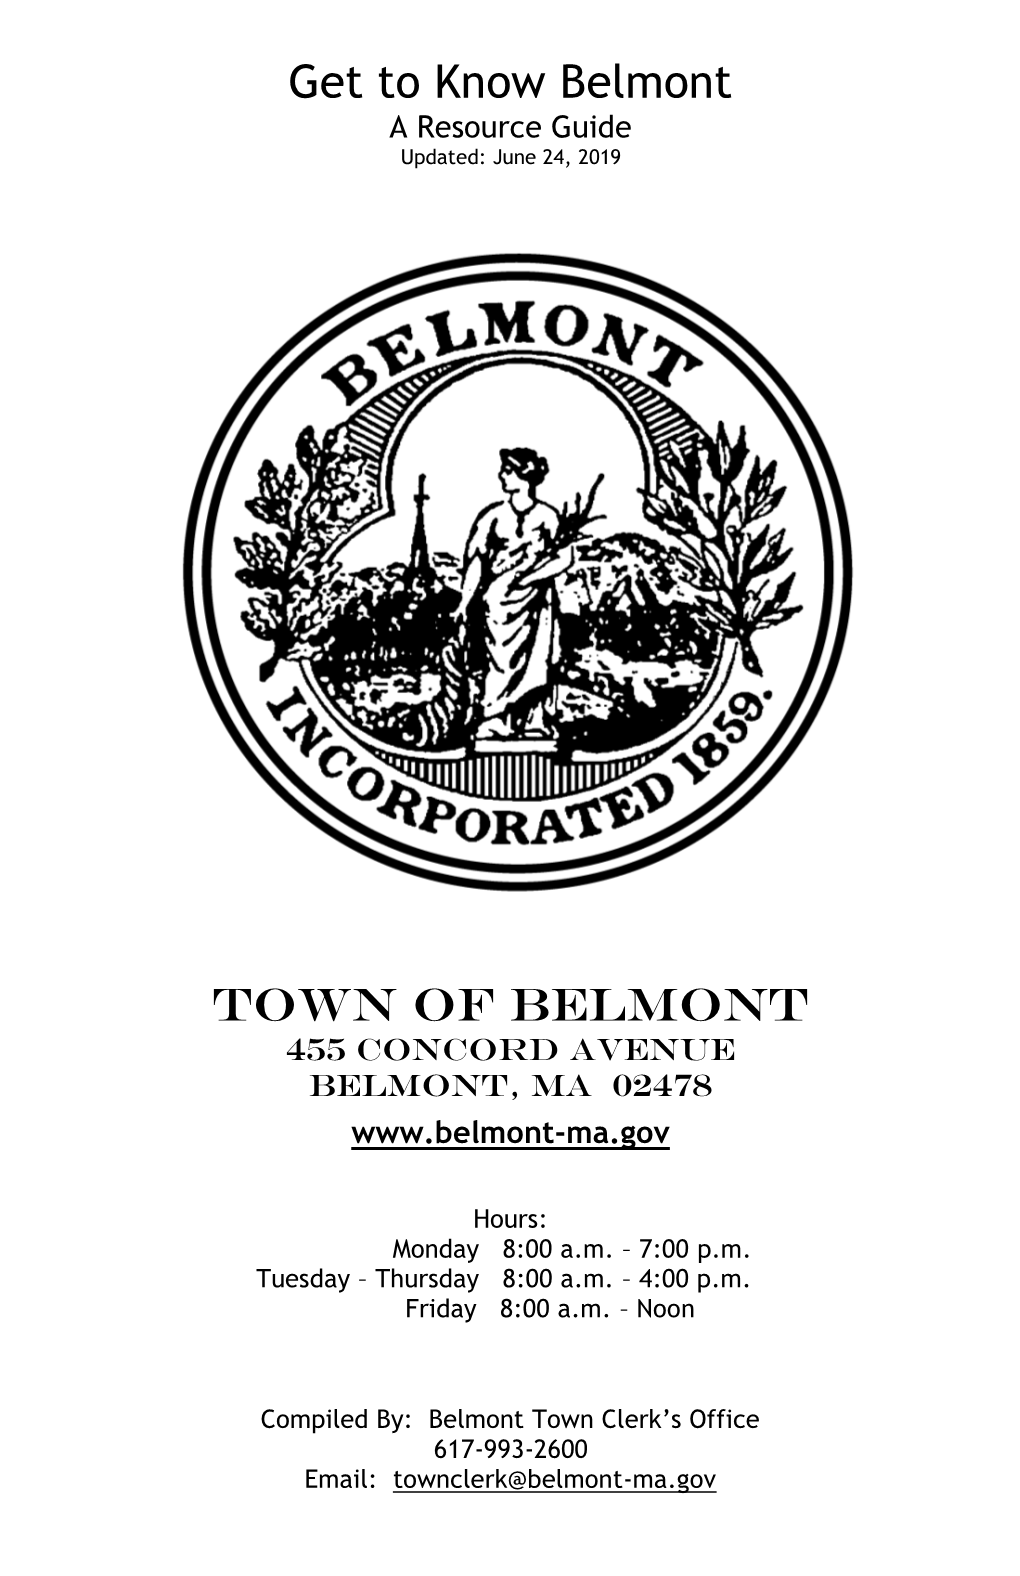 Get to Know Belmont a Resource Guide Updated: June 24, 2019